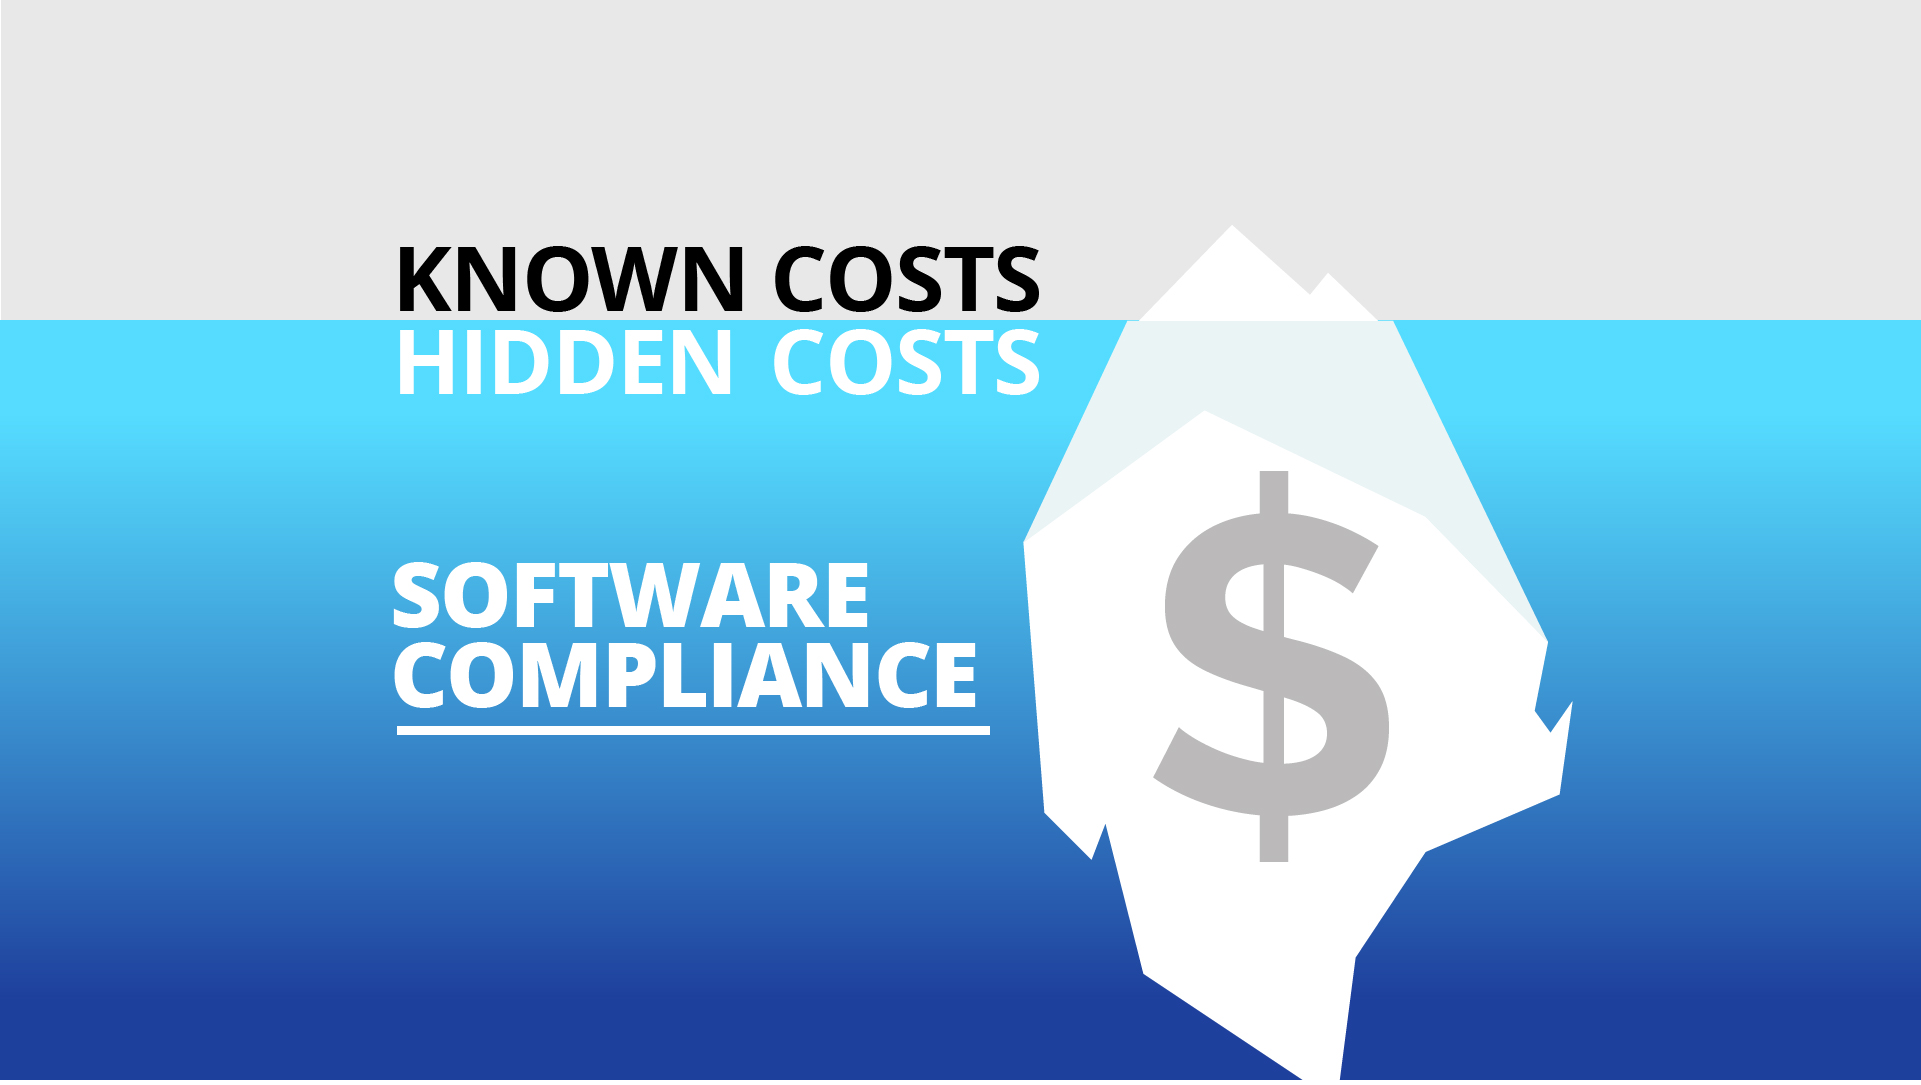 Achieving Software Compliance is challenging, but necessary.